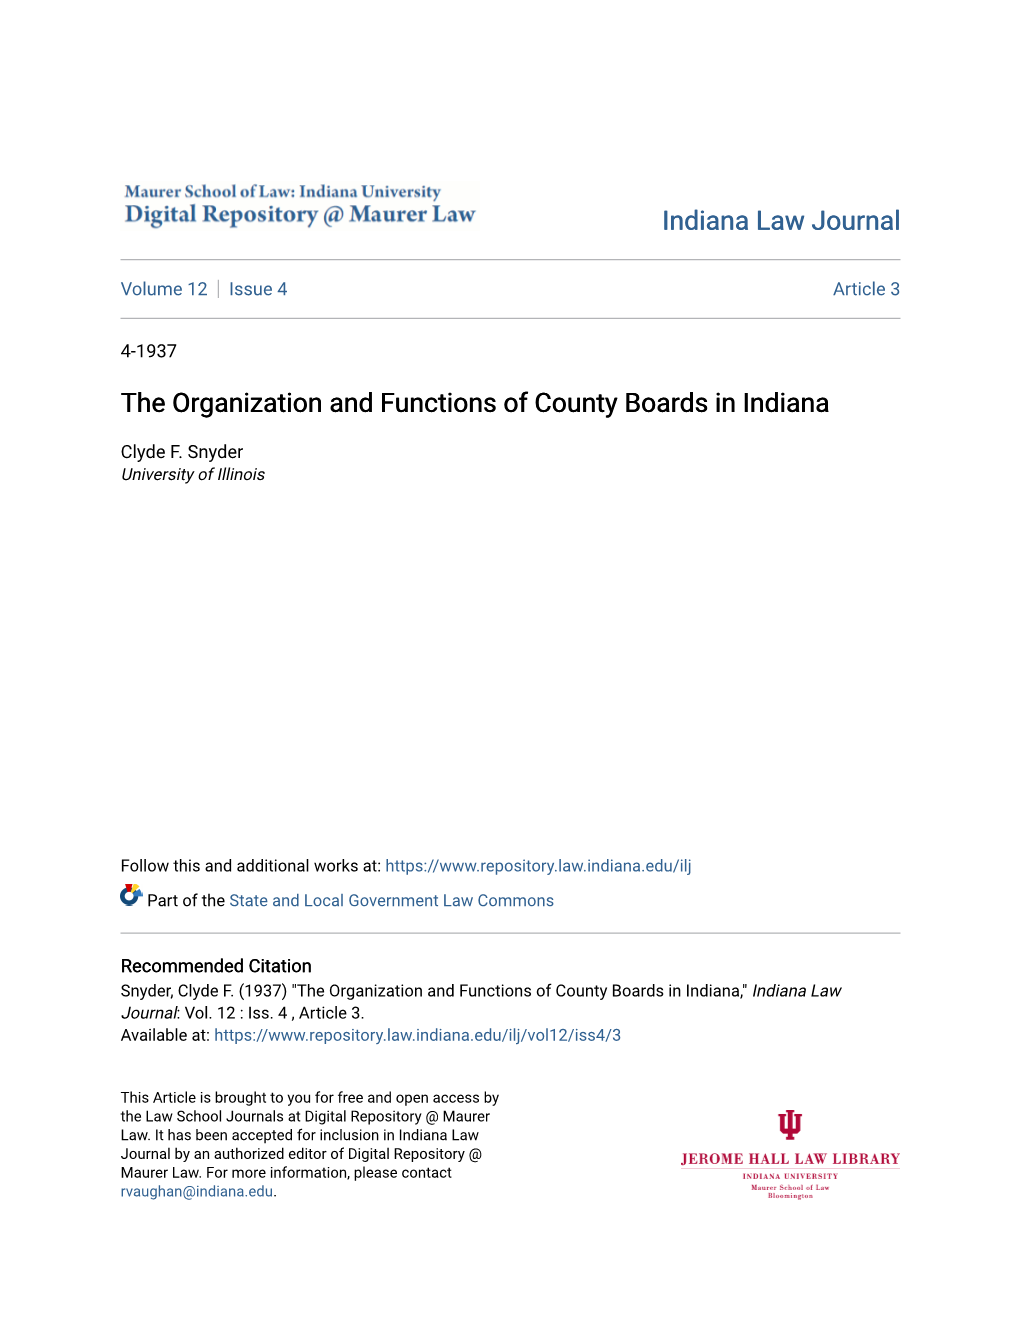 The Organization and Functions of County Boards in Indiana